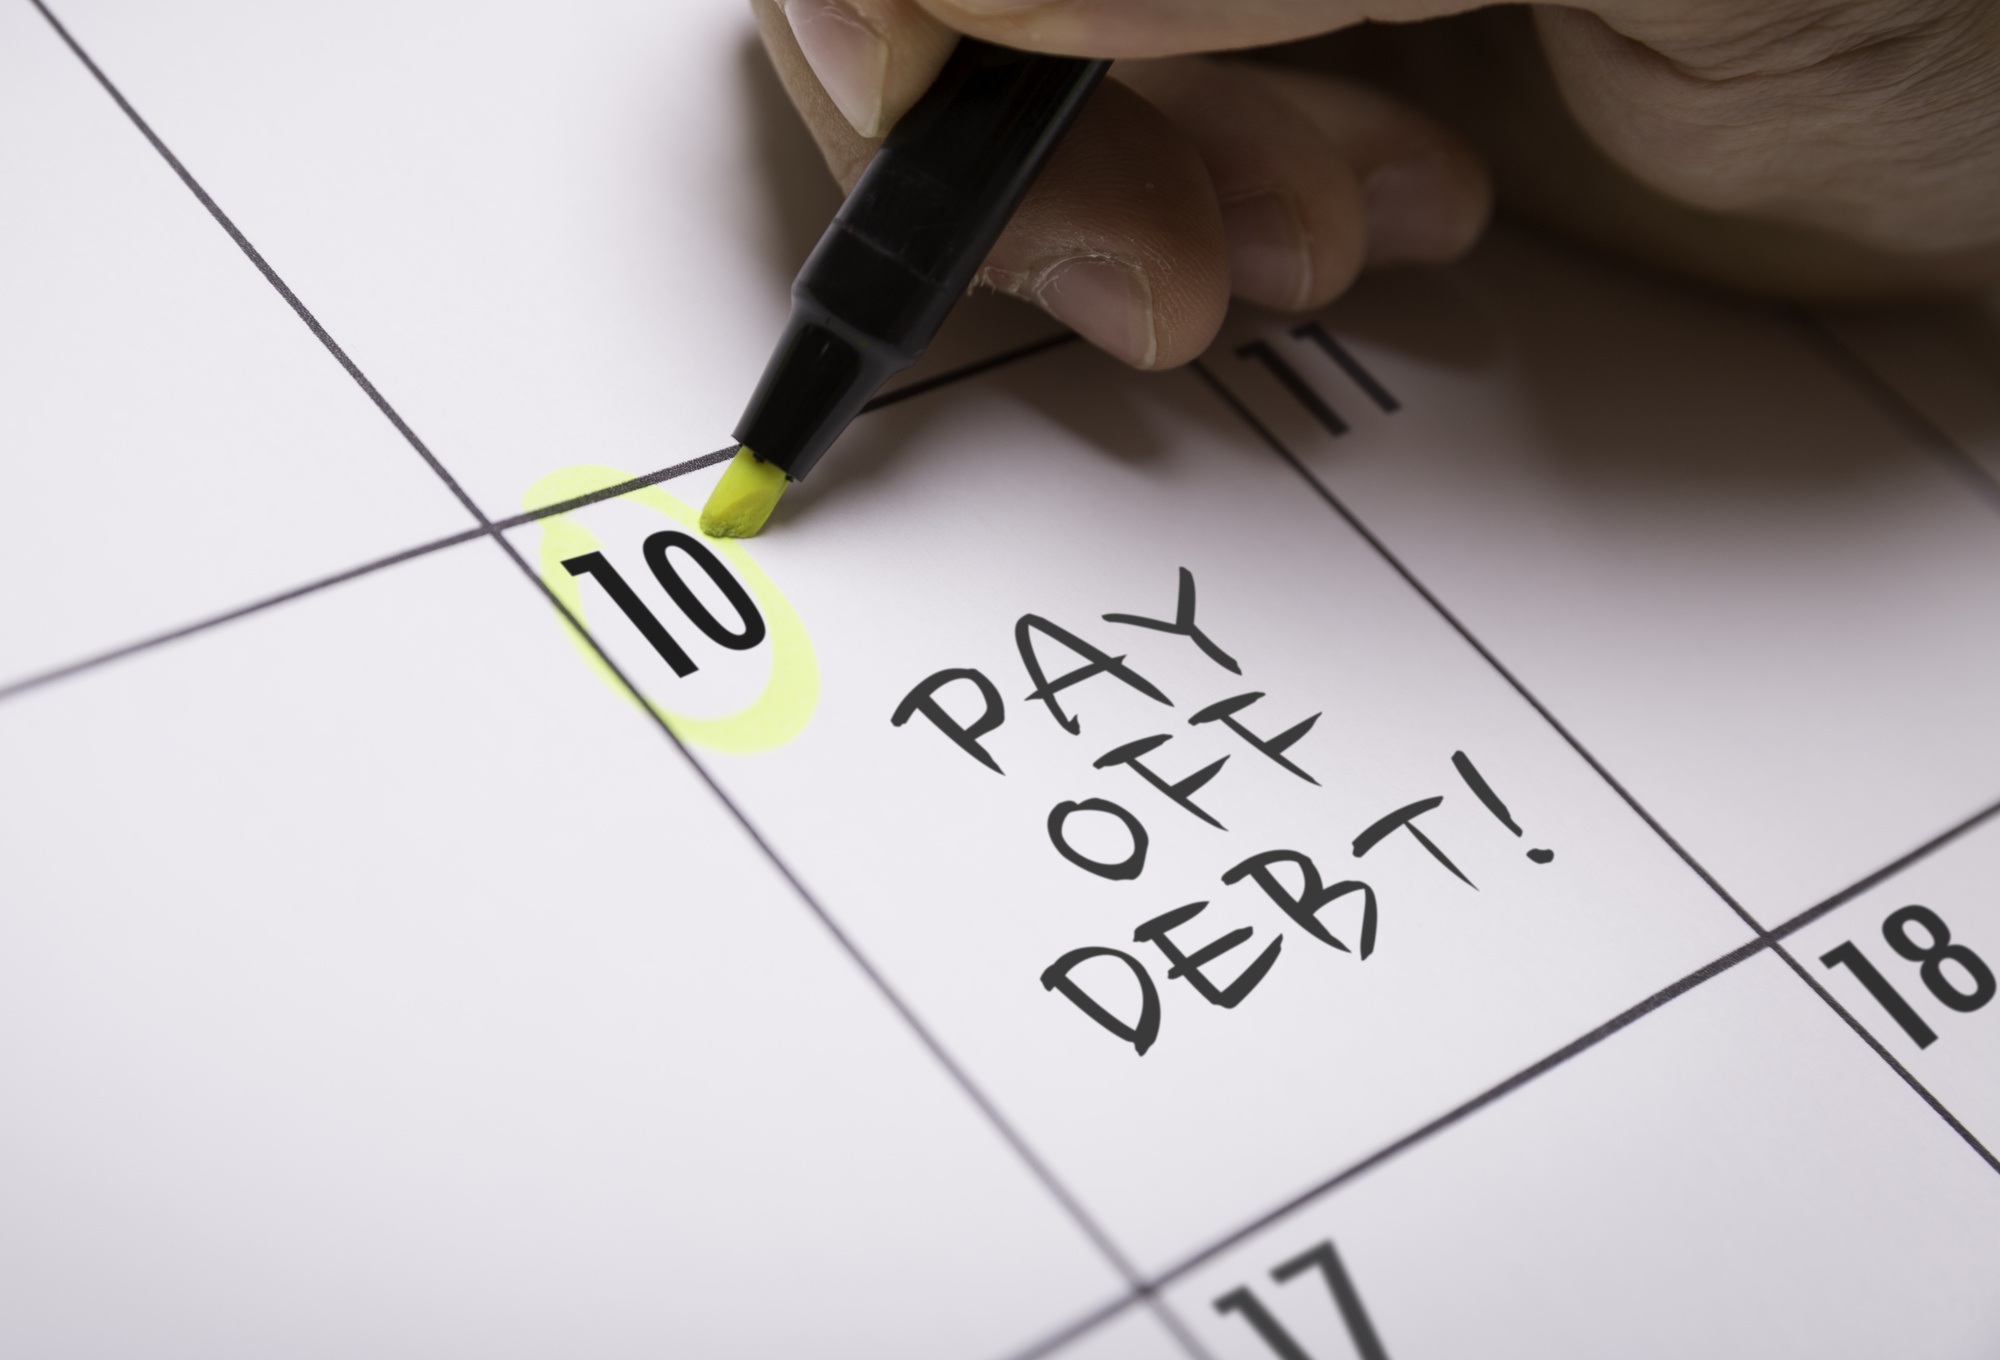 There are several types of debt that you should be familiar with. Keep reading to learn more about these causes and solutions.